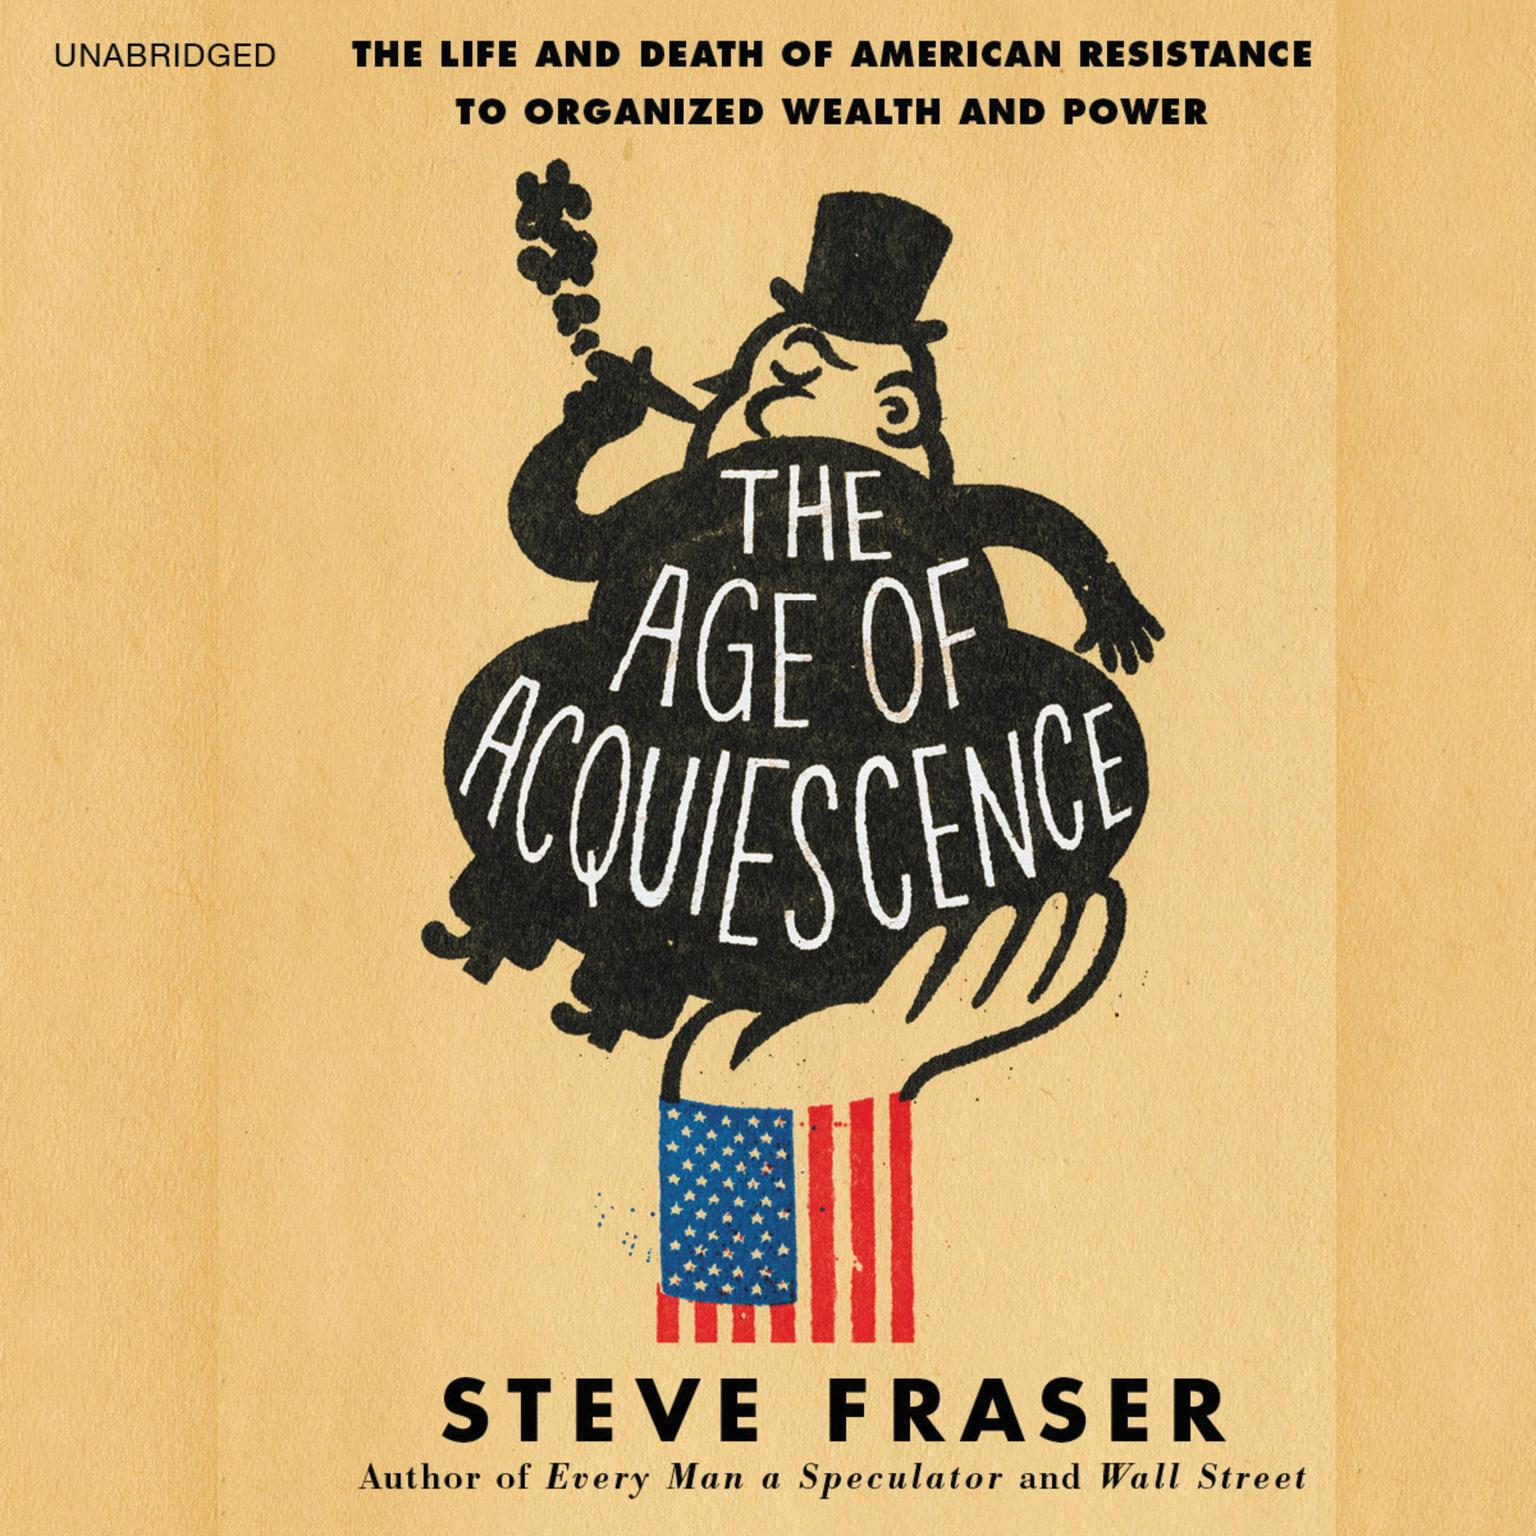 The Age of Acquiescence: The Life and Death of American Resistance to Organized Wealth and Power Audiobook, by Steve Fraser